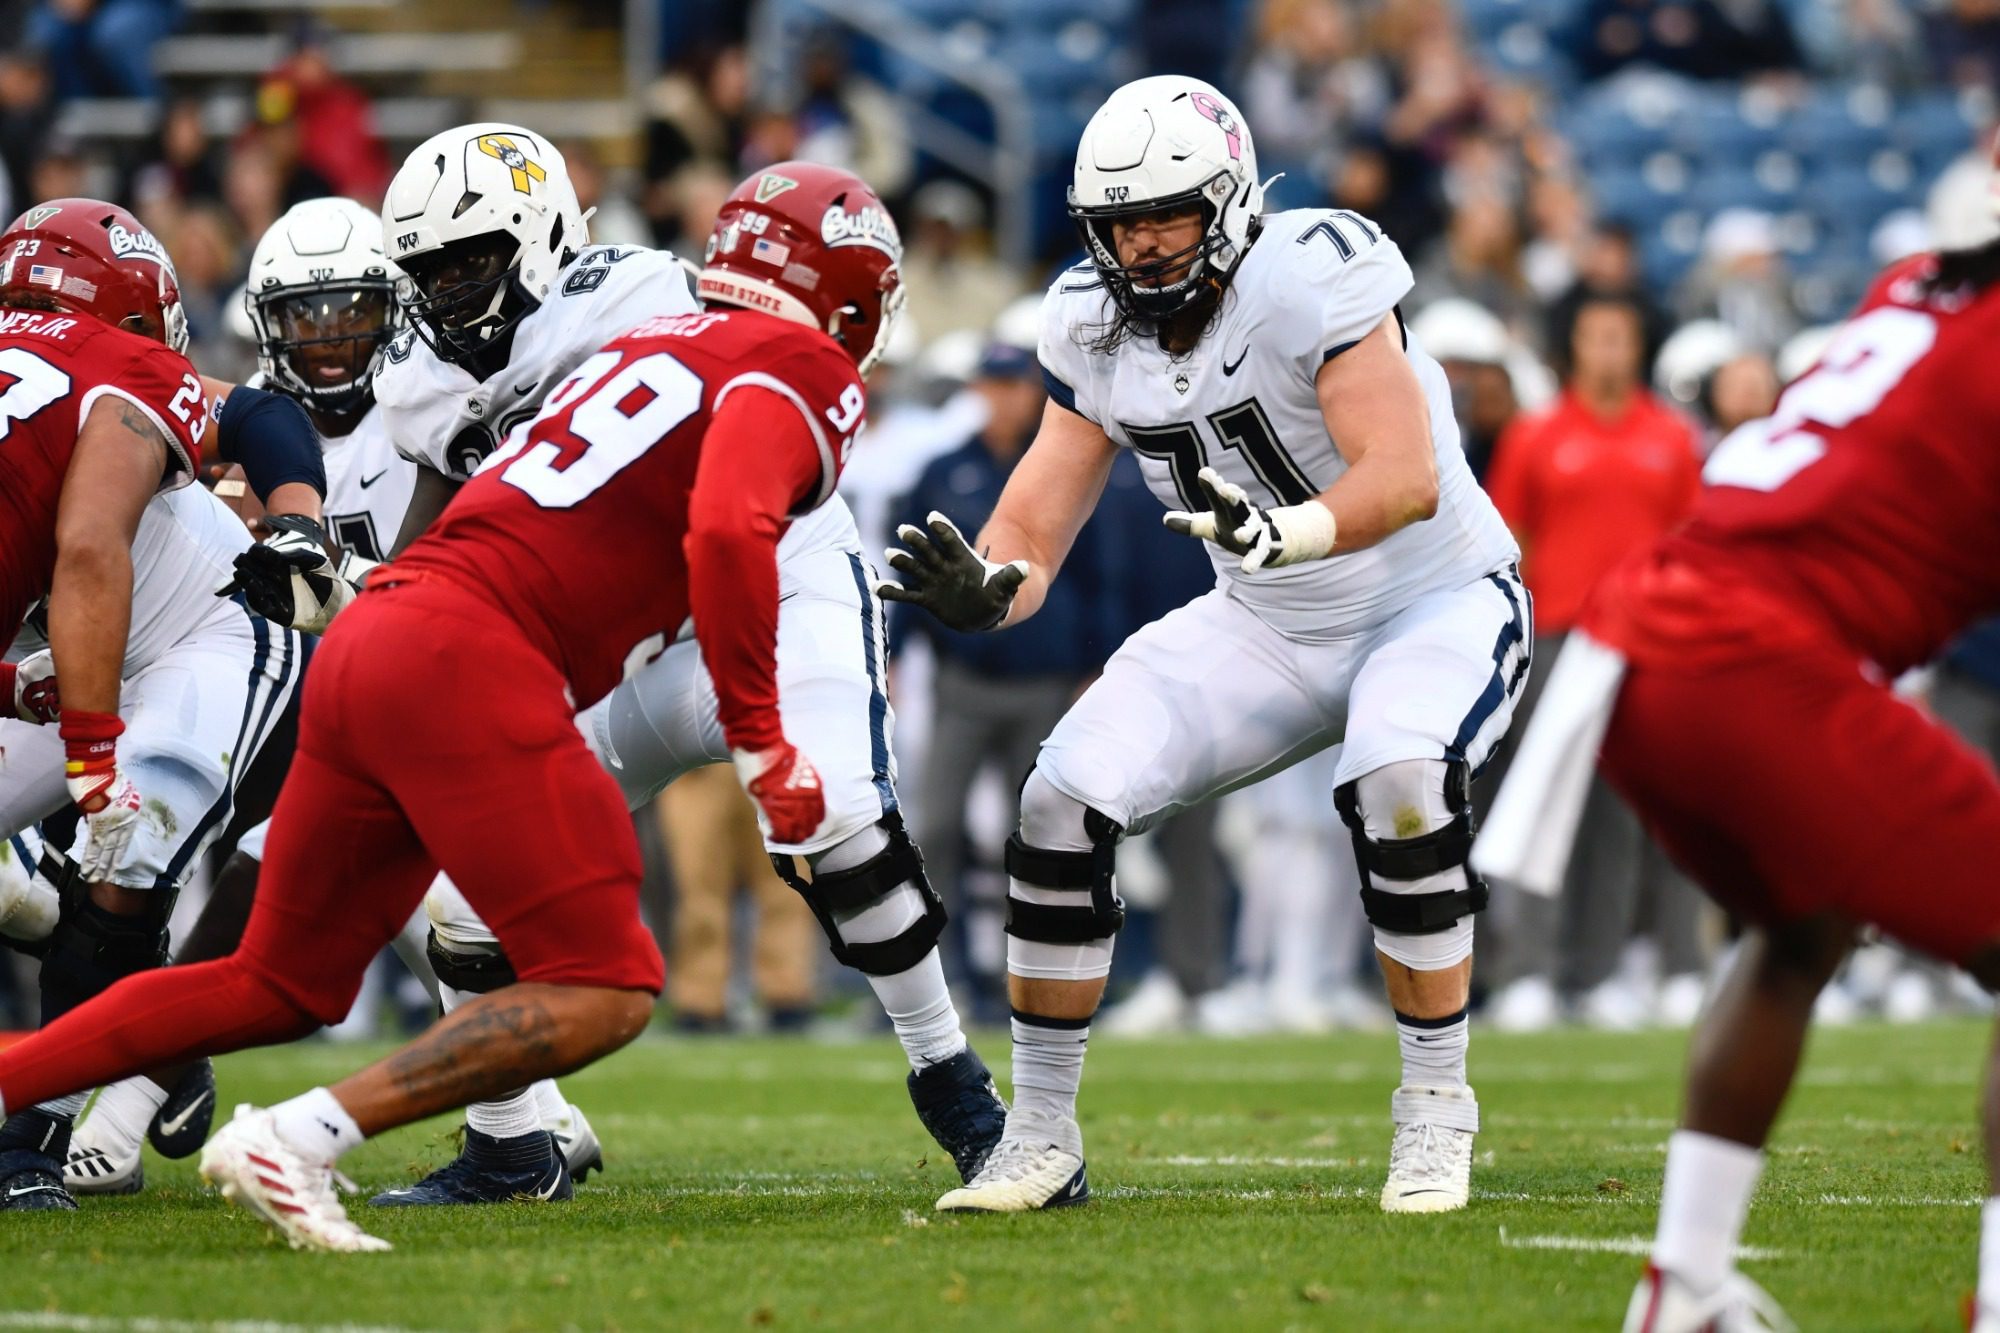 Valentin Senn is a massive mauler on the UConn offensive line who's a good pass protector. Hula Bowl scout Ryan Jaffe breaks him down as an NFL Prospect in his report.